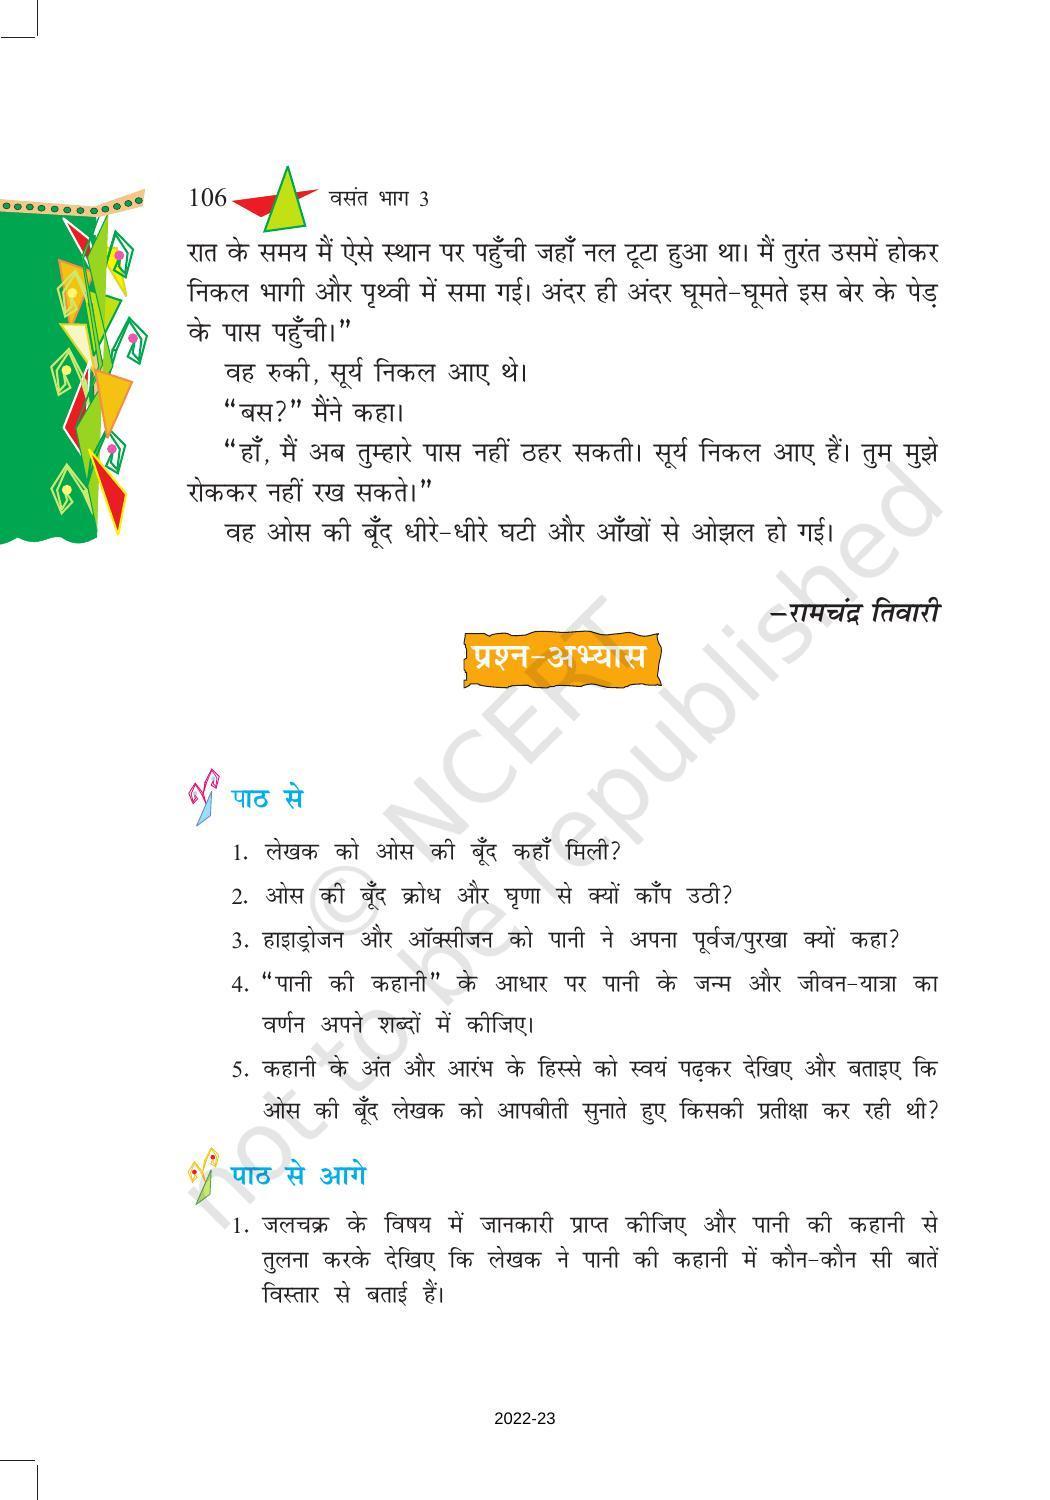 NCERT Book for Class 8 Hindi Vasant Chapter 16 पानी की कहानी - Page 9